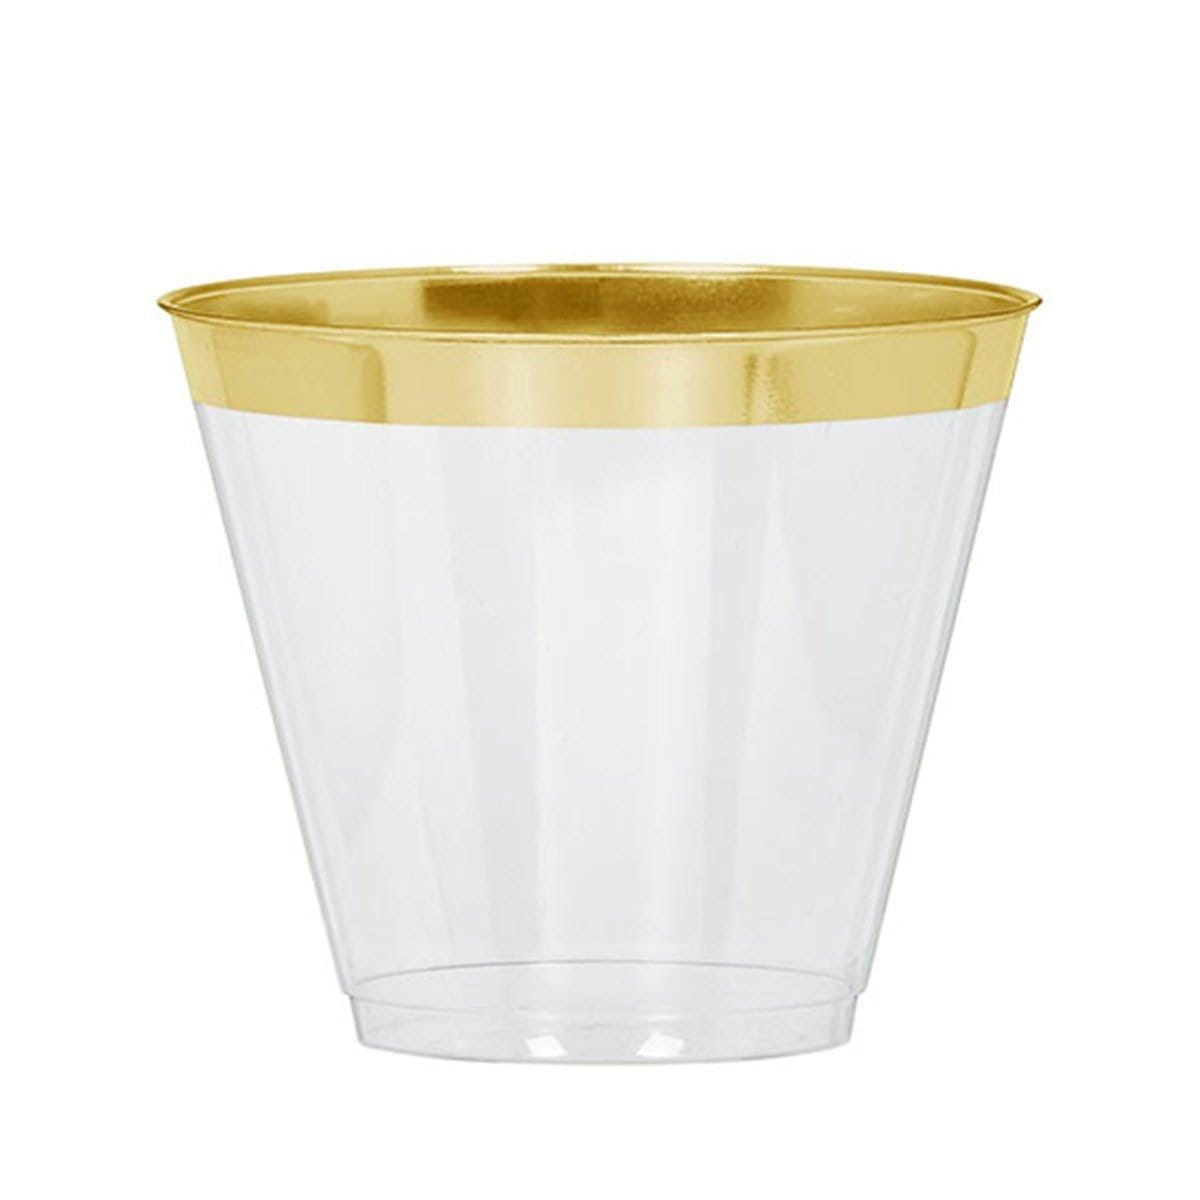 Buy Plasticware Tumblers - Gold Trim 9 Oz 24/pkg. sold at Party Expert